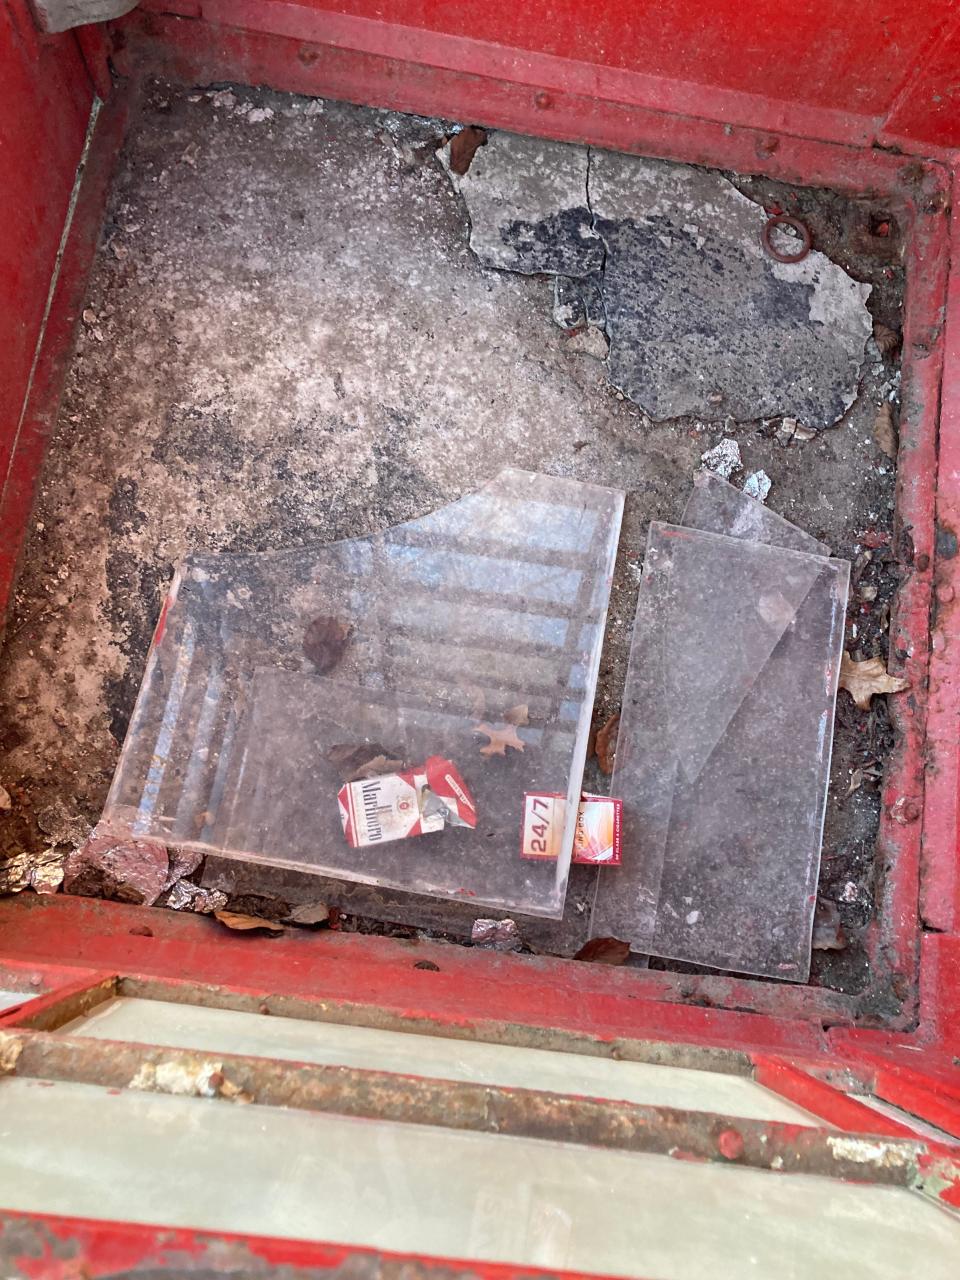 A run-down British red telephone booth has been a dumping ground for some as it stands outside the Portsmouth Historical Society.